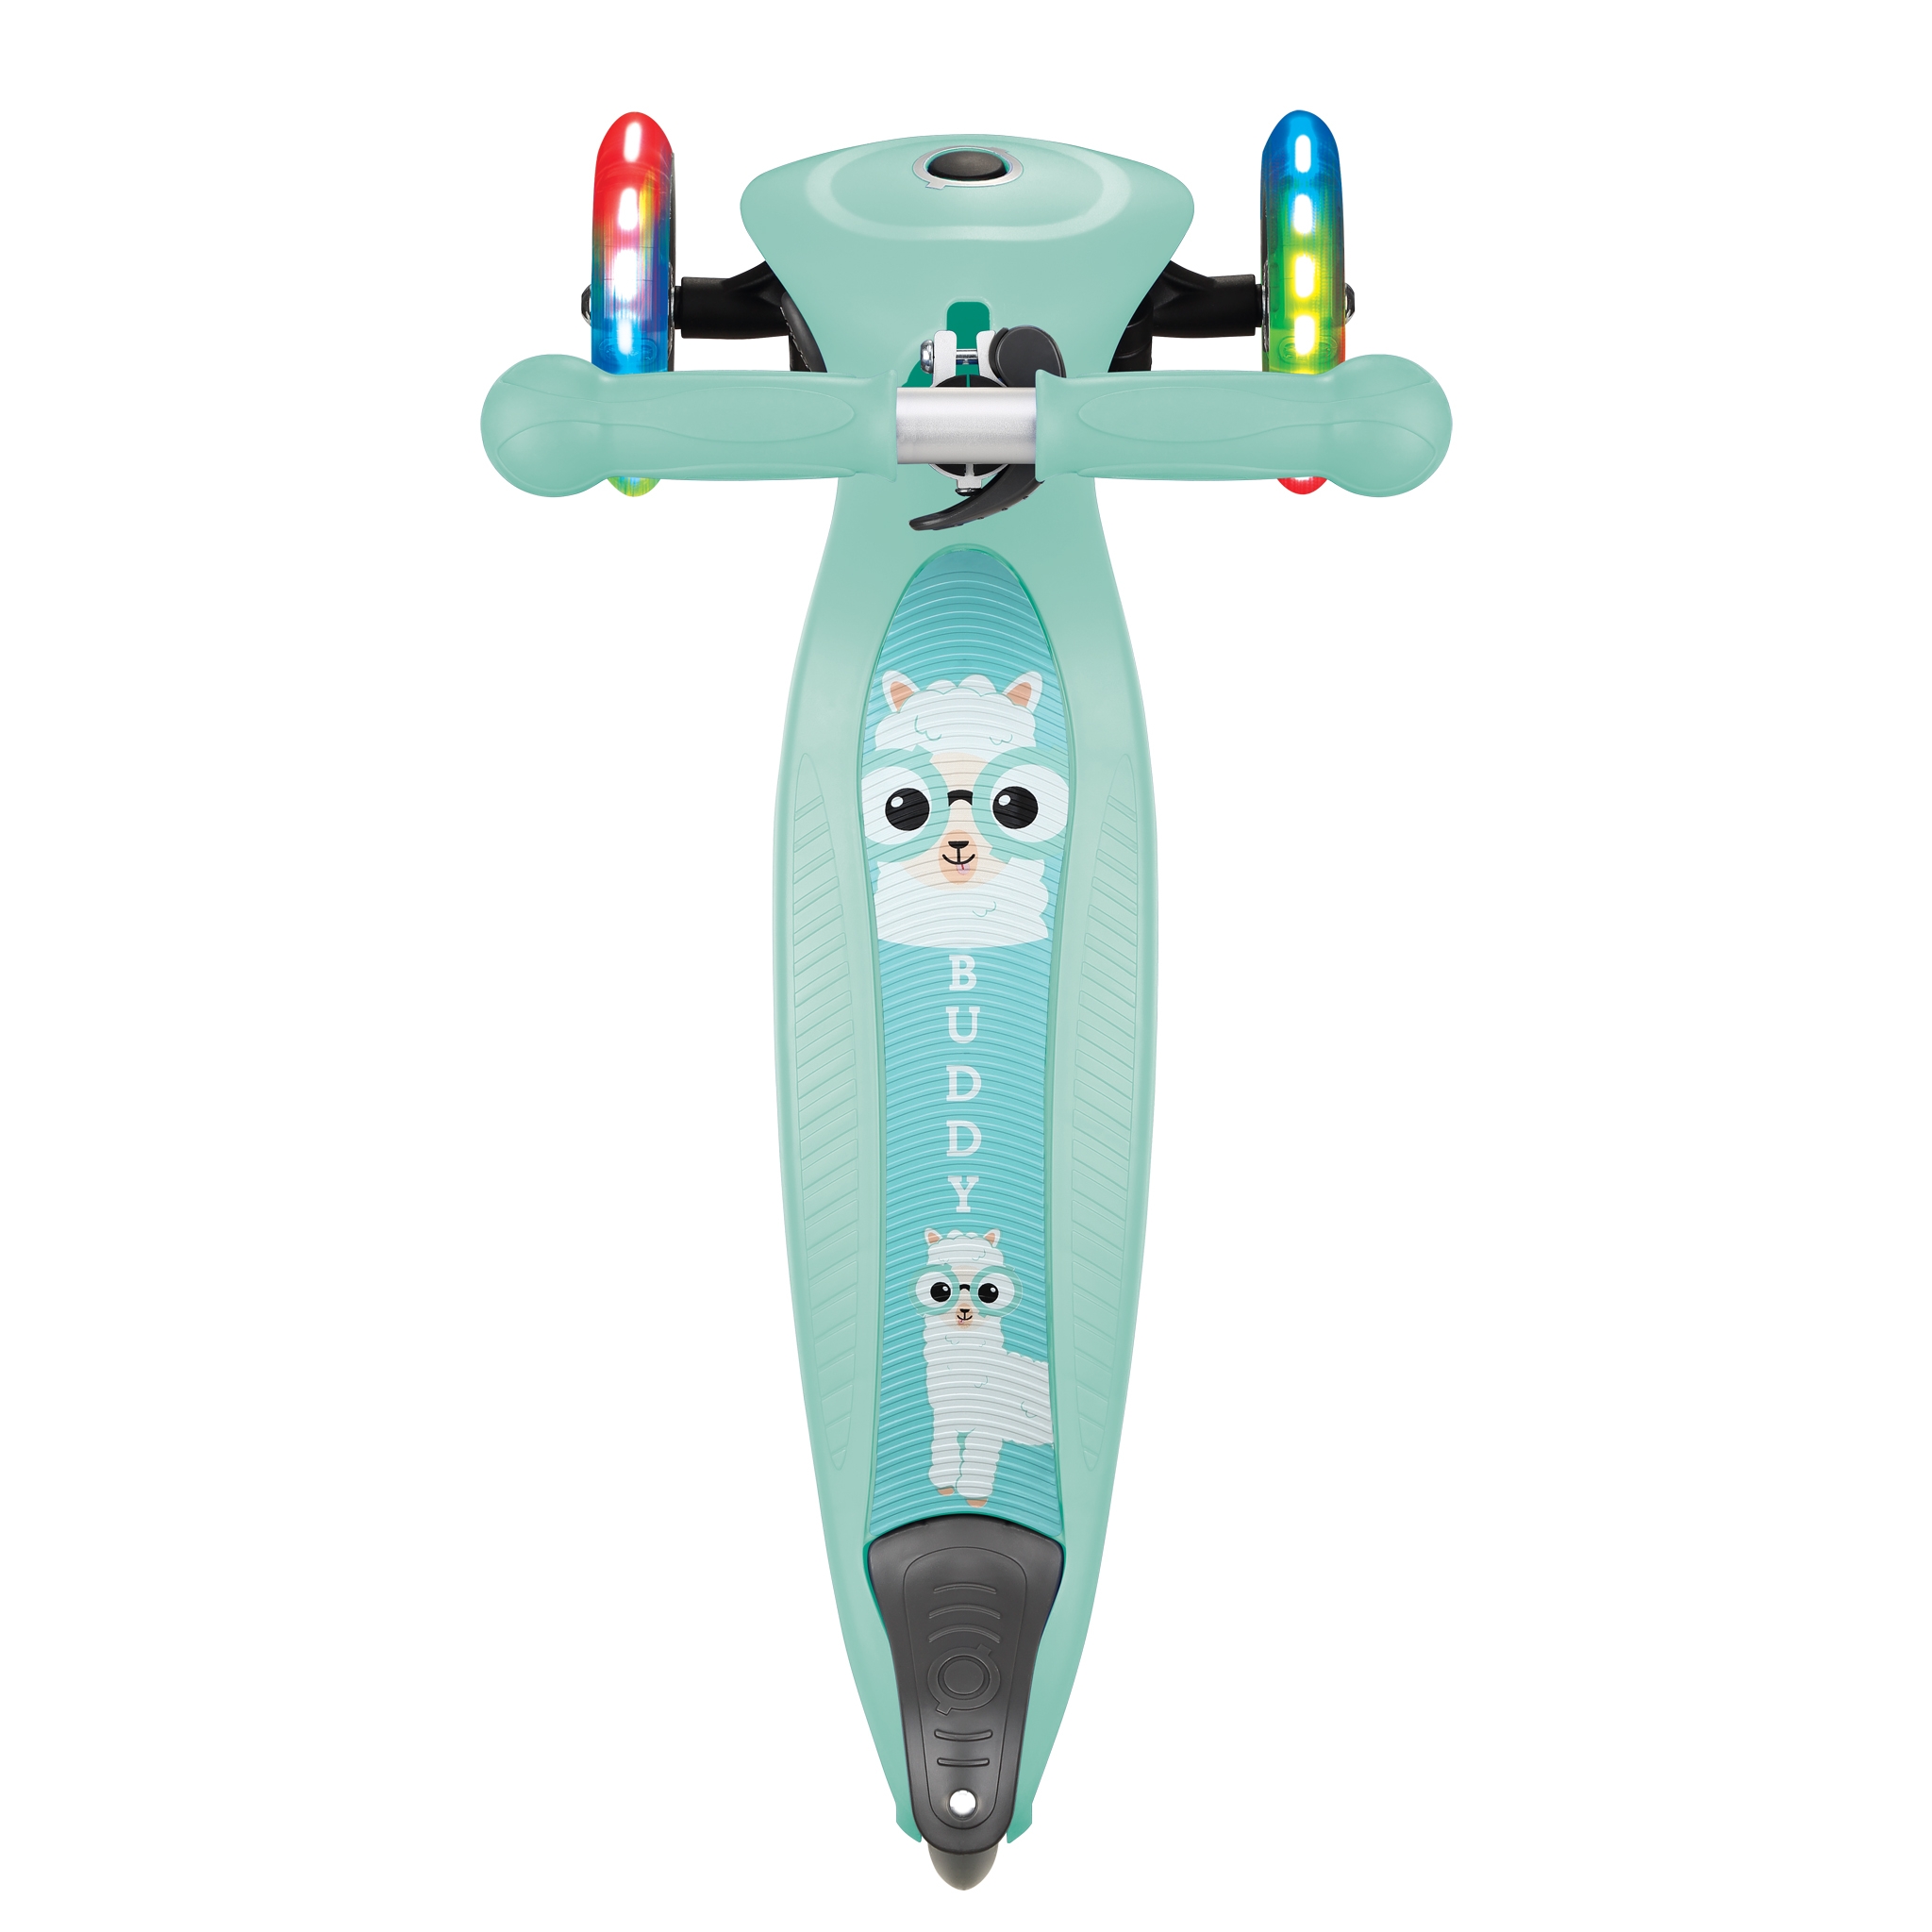 primo-foldable-fantasy-lights-3-wheel-scooter-for-3-year-old-with-patterned-deck 2